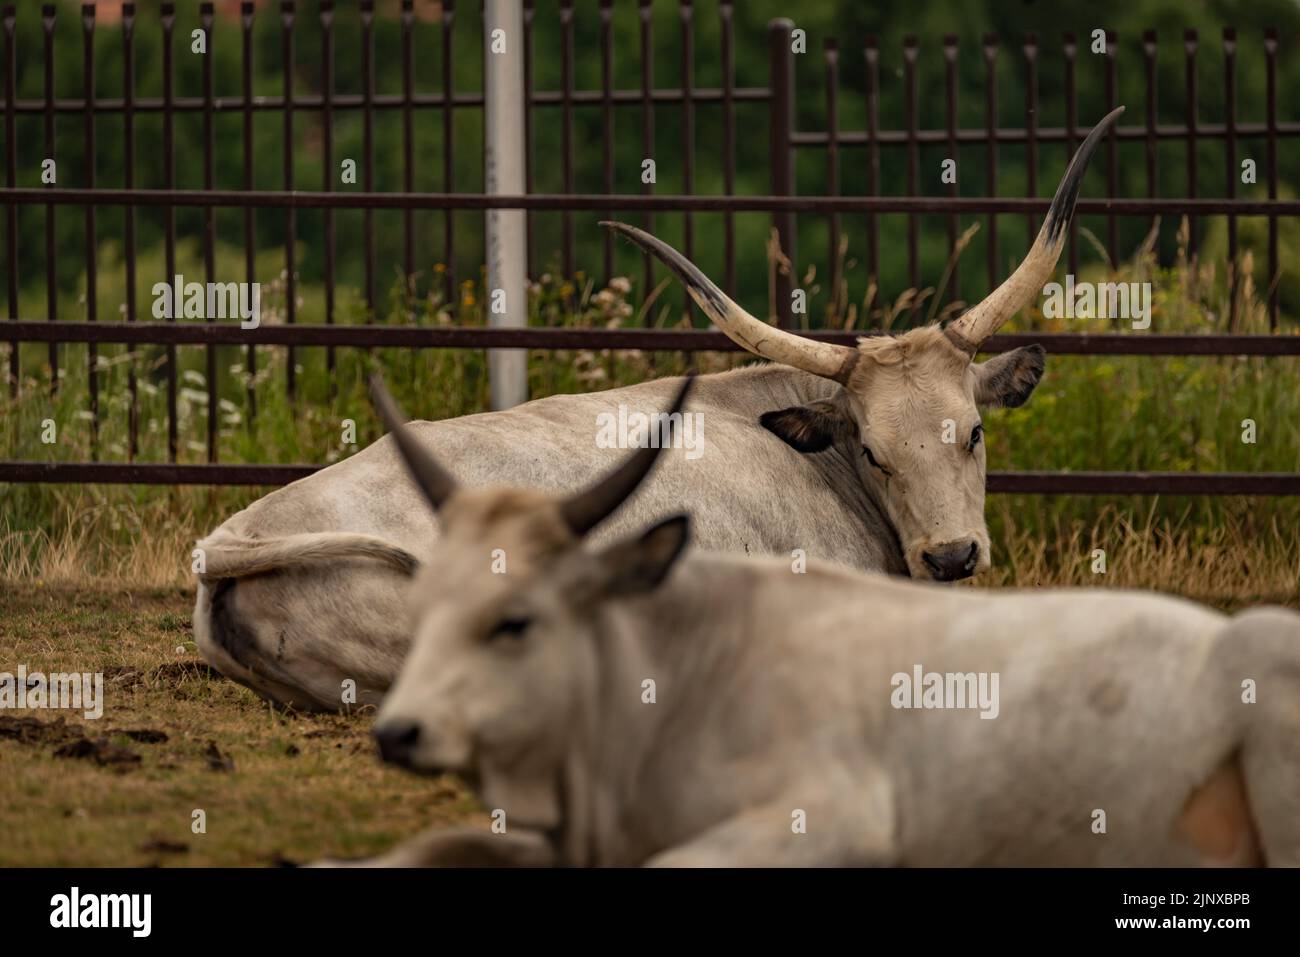 White long horn cow on dry grass in dark cloudy summer day Stock Photo